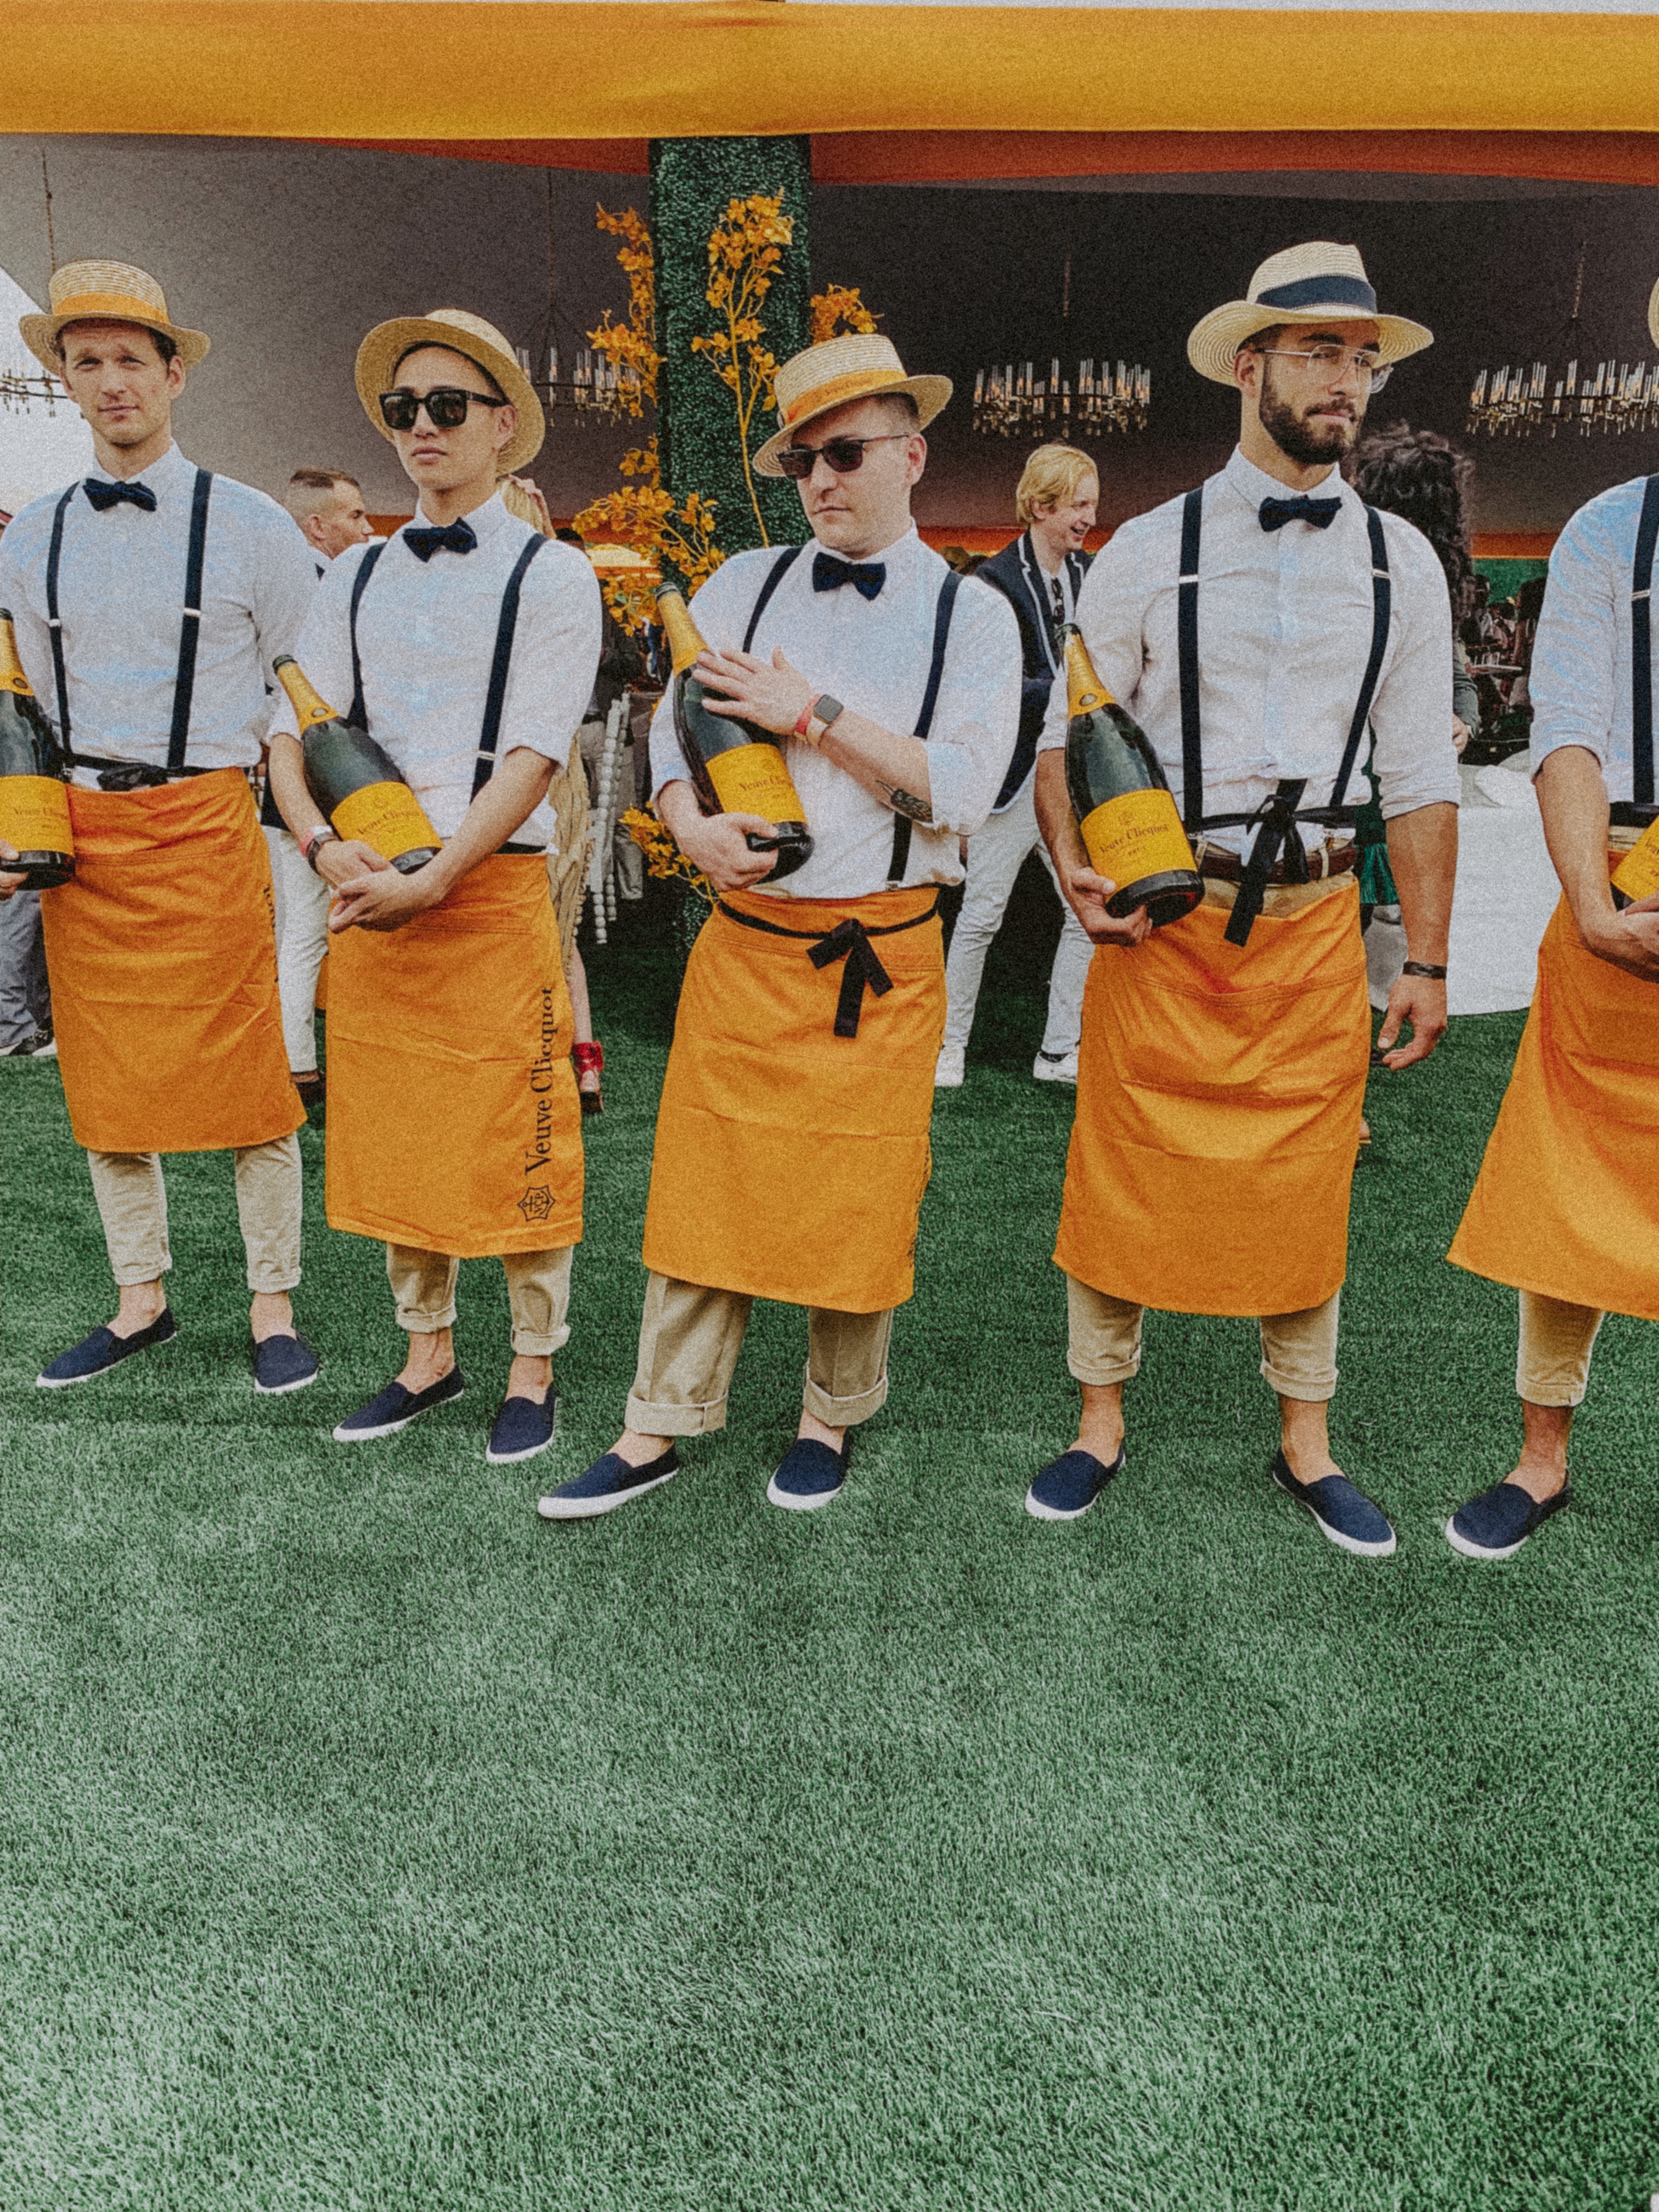 The Resource at the Veuve Clicquot Polo Classic — The Resource